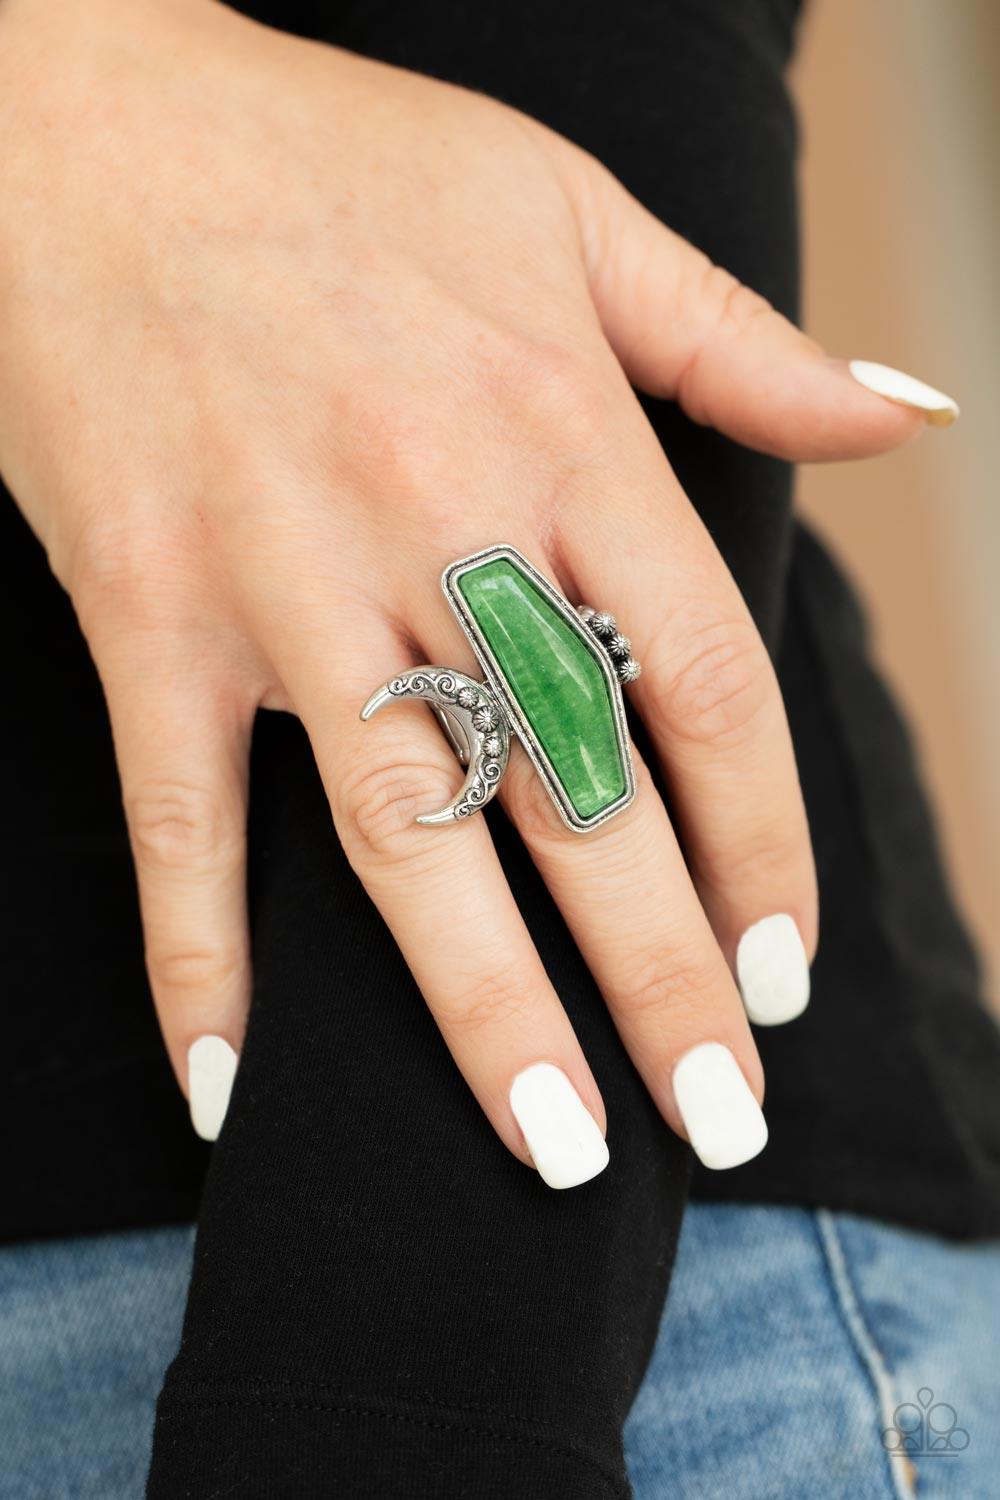 Paparazzi Accessories Cosmic Karma - Green Encased in a raised silver fitting, a geometric jade stone is flank by a decorative row of silver studs and an ornate half moon frame for a seasonal statement. The oversized frame is attentional, creating the ill